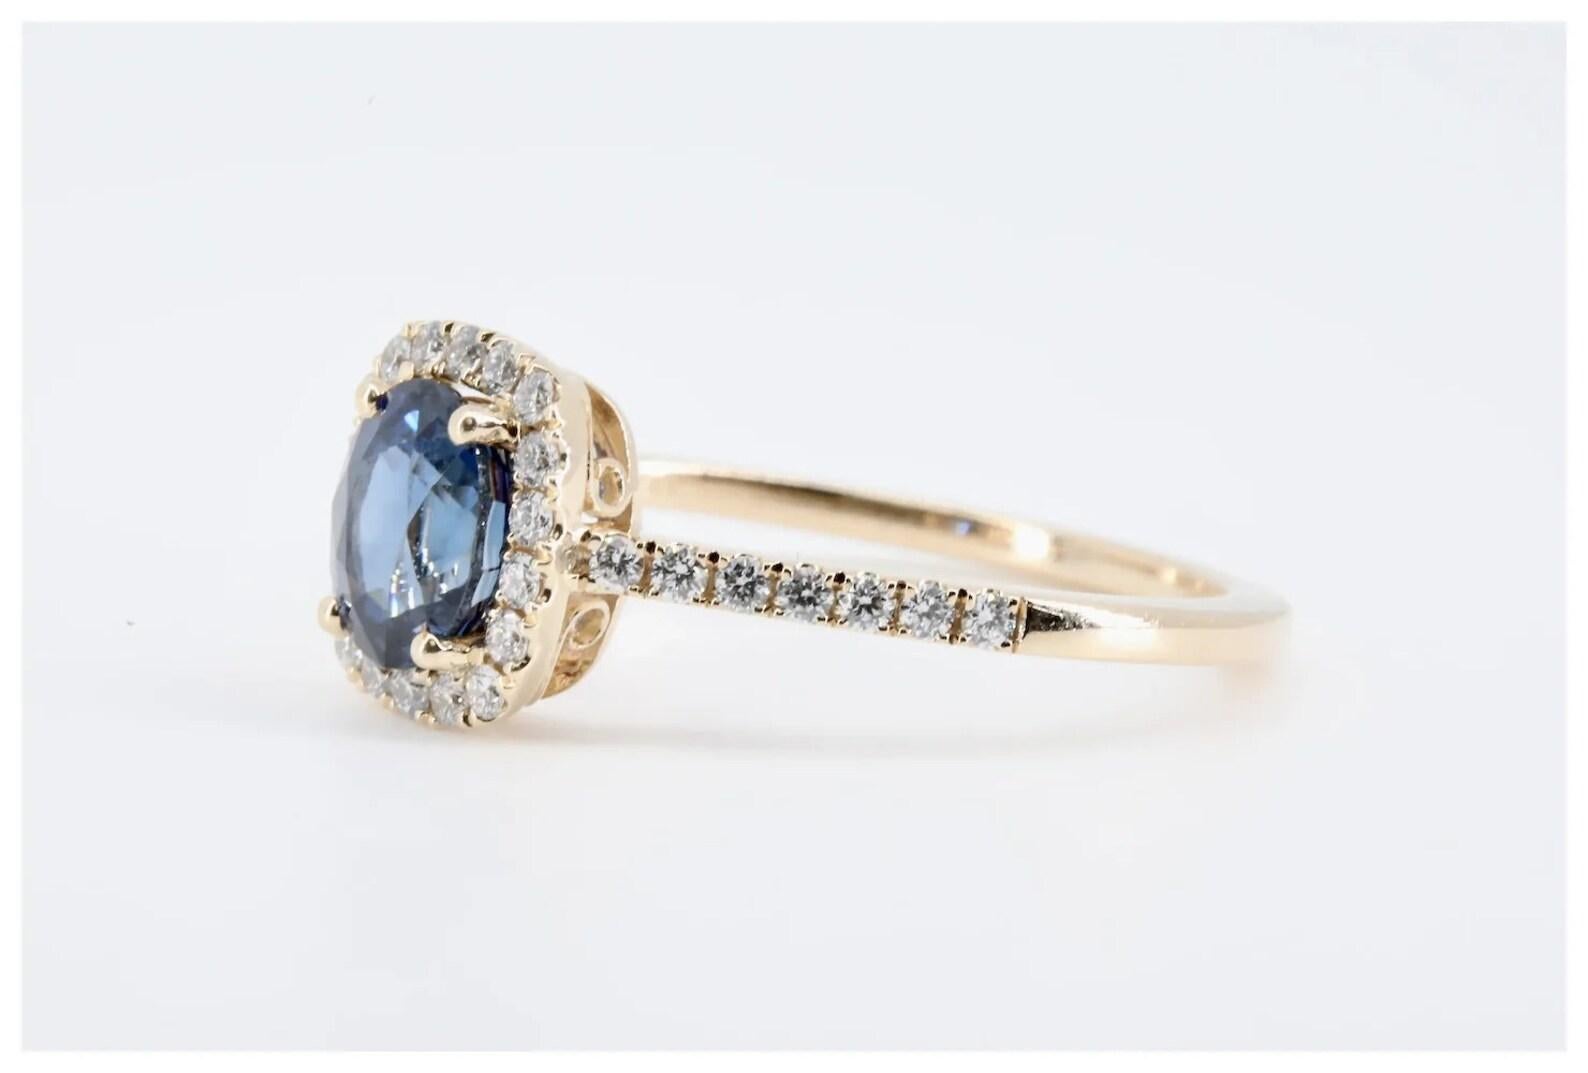 A velvety blue sapphire, and brilliant cut diamond halo engagement ring in 14 karat yellow gold.

Centered by a 1.20 carat cushion shaped blue sapphire, heat treatment only.

The mounting accented with 0.24 carats of brilliant cut diamonds